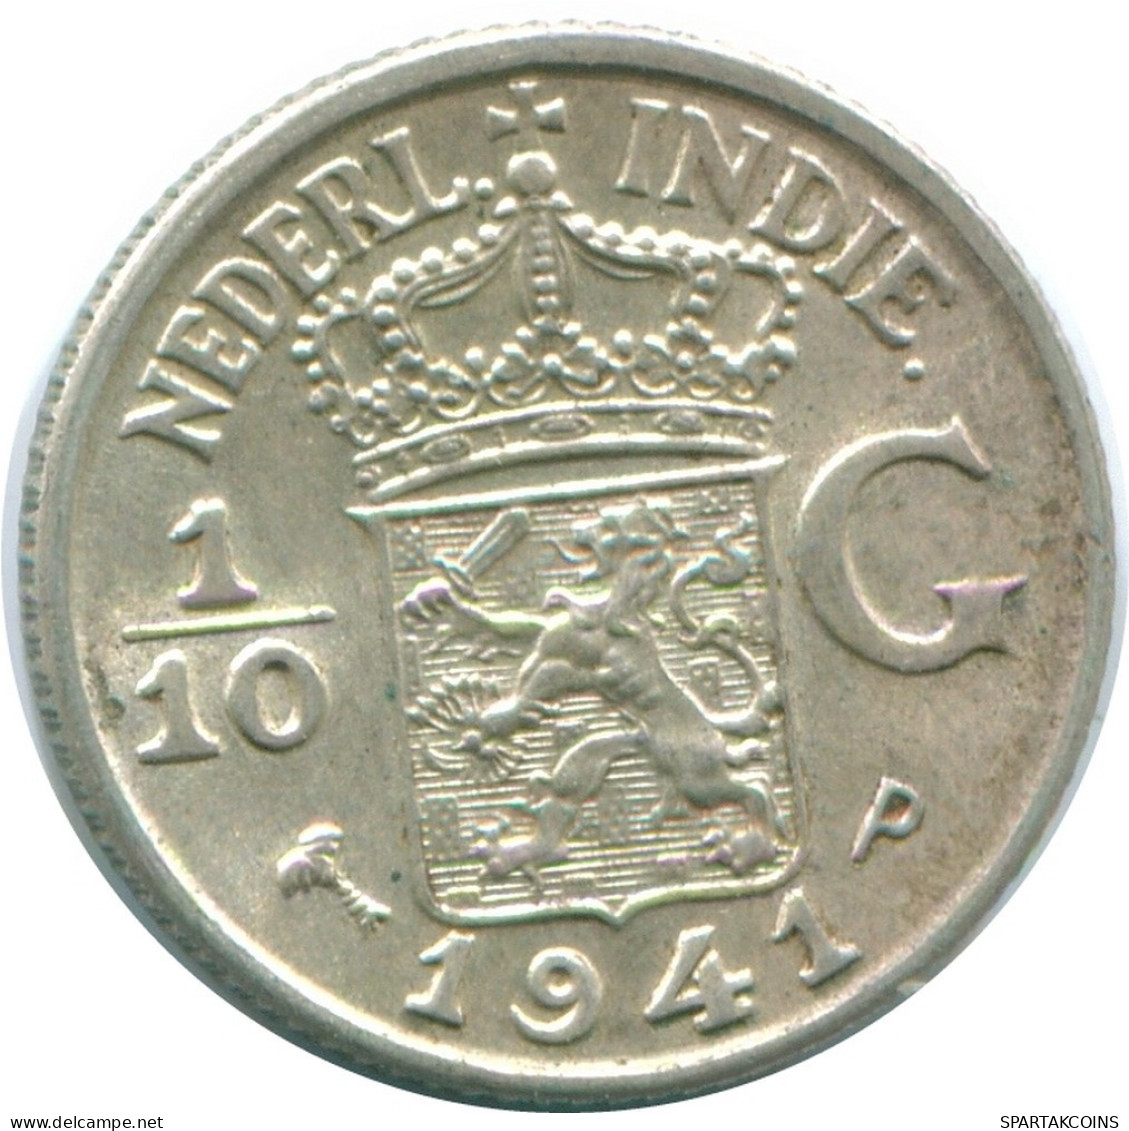 1/10 GULDEN 1941 P NETHERLANDS EAST INDIES SILVER Colonial Coin #NL13633.3.U.A - Dutch East Indies